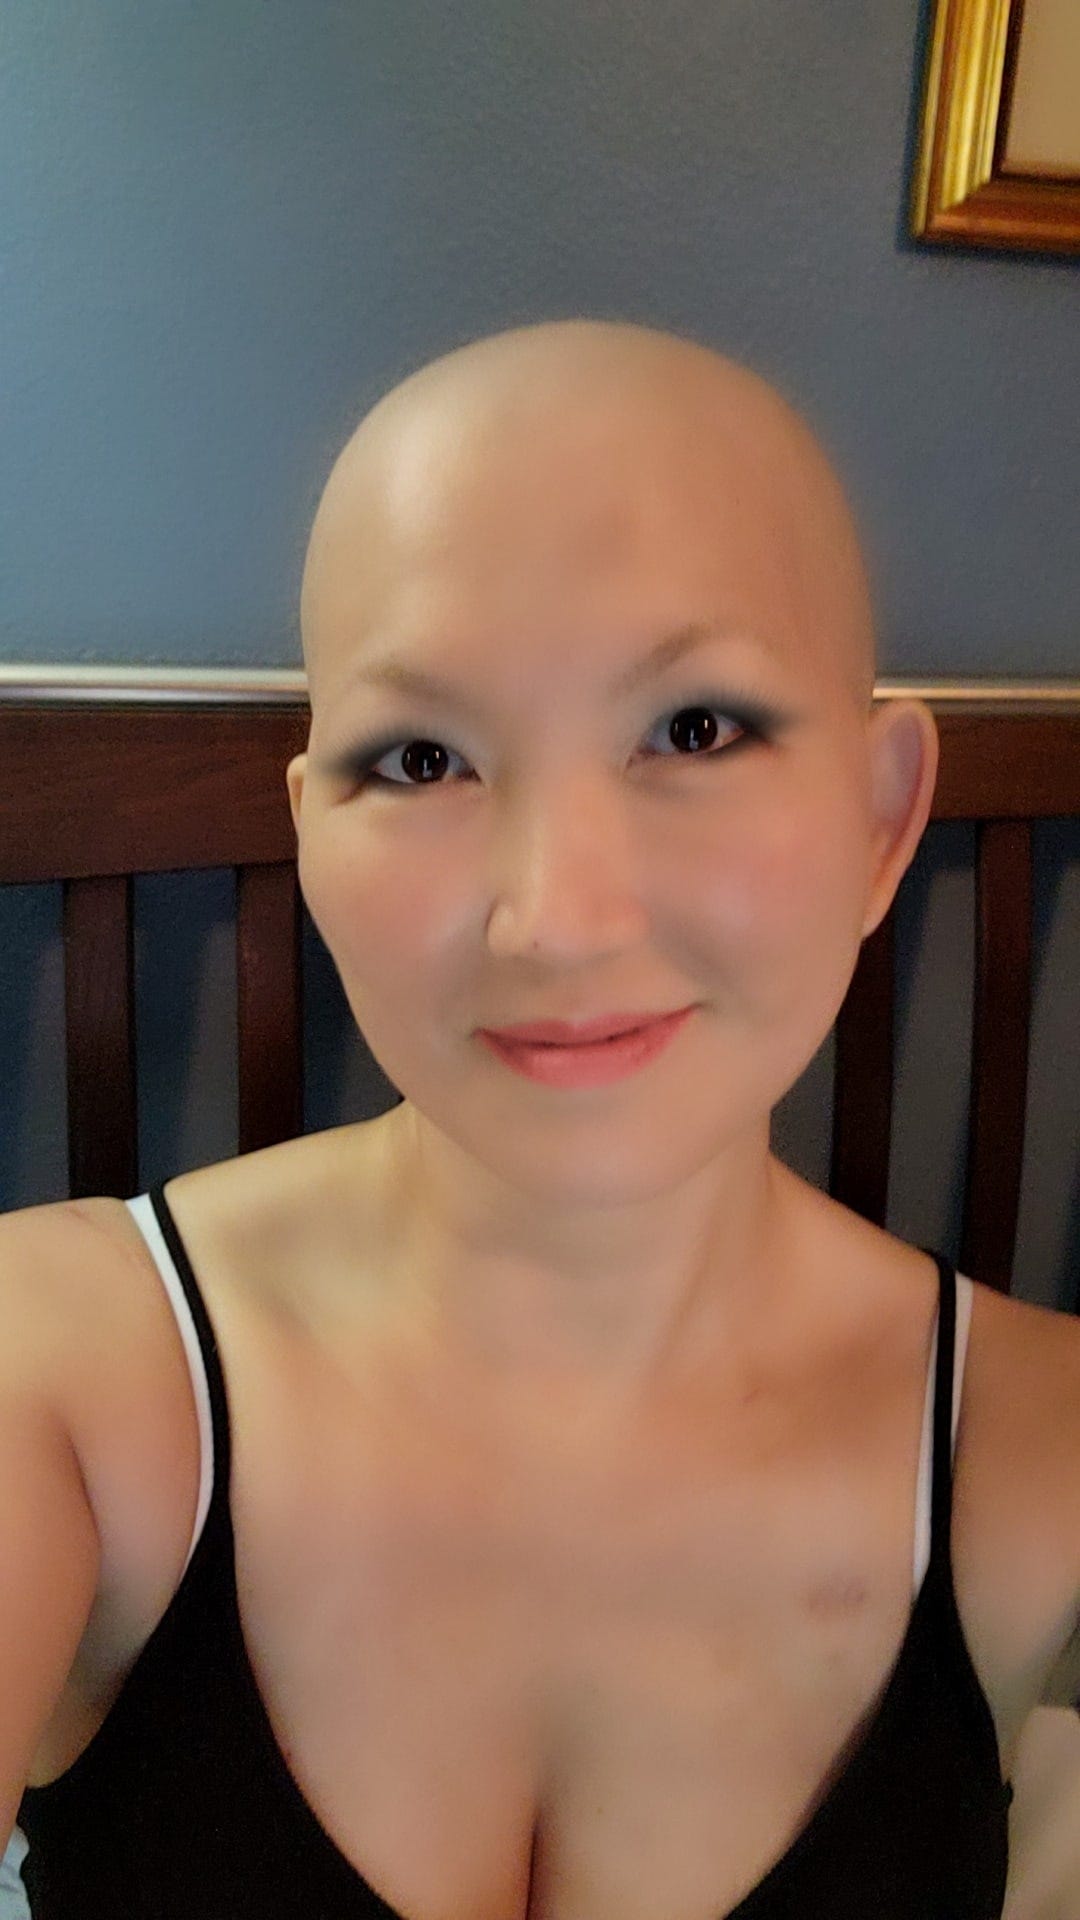 Black Widow Jeanette Lee one year after Stage 4 cancer diagnosis